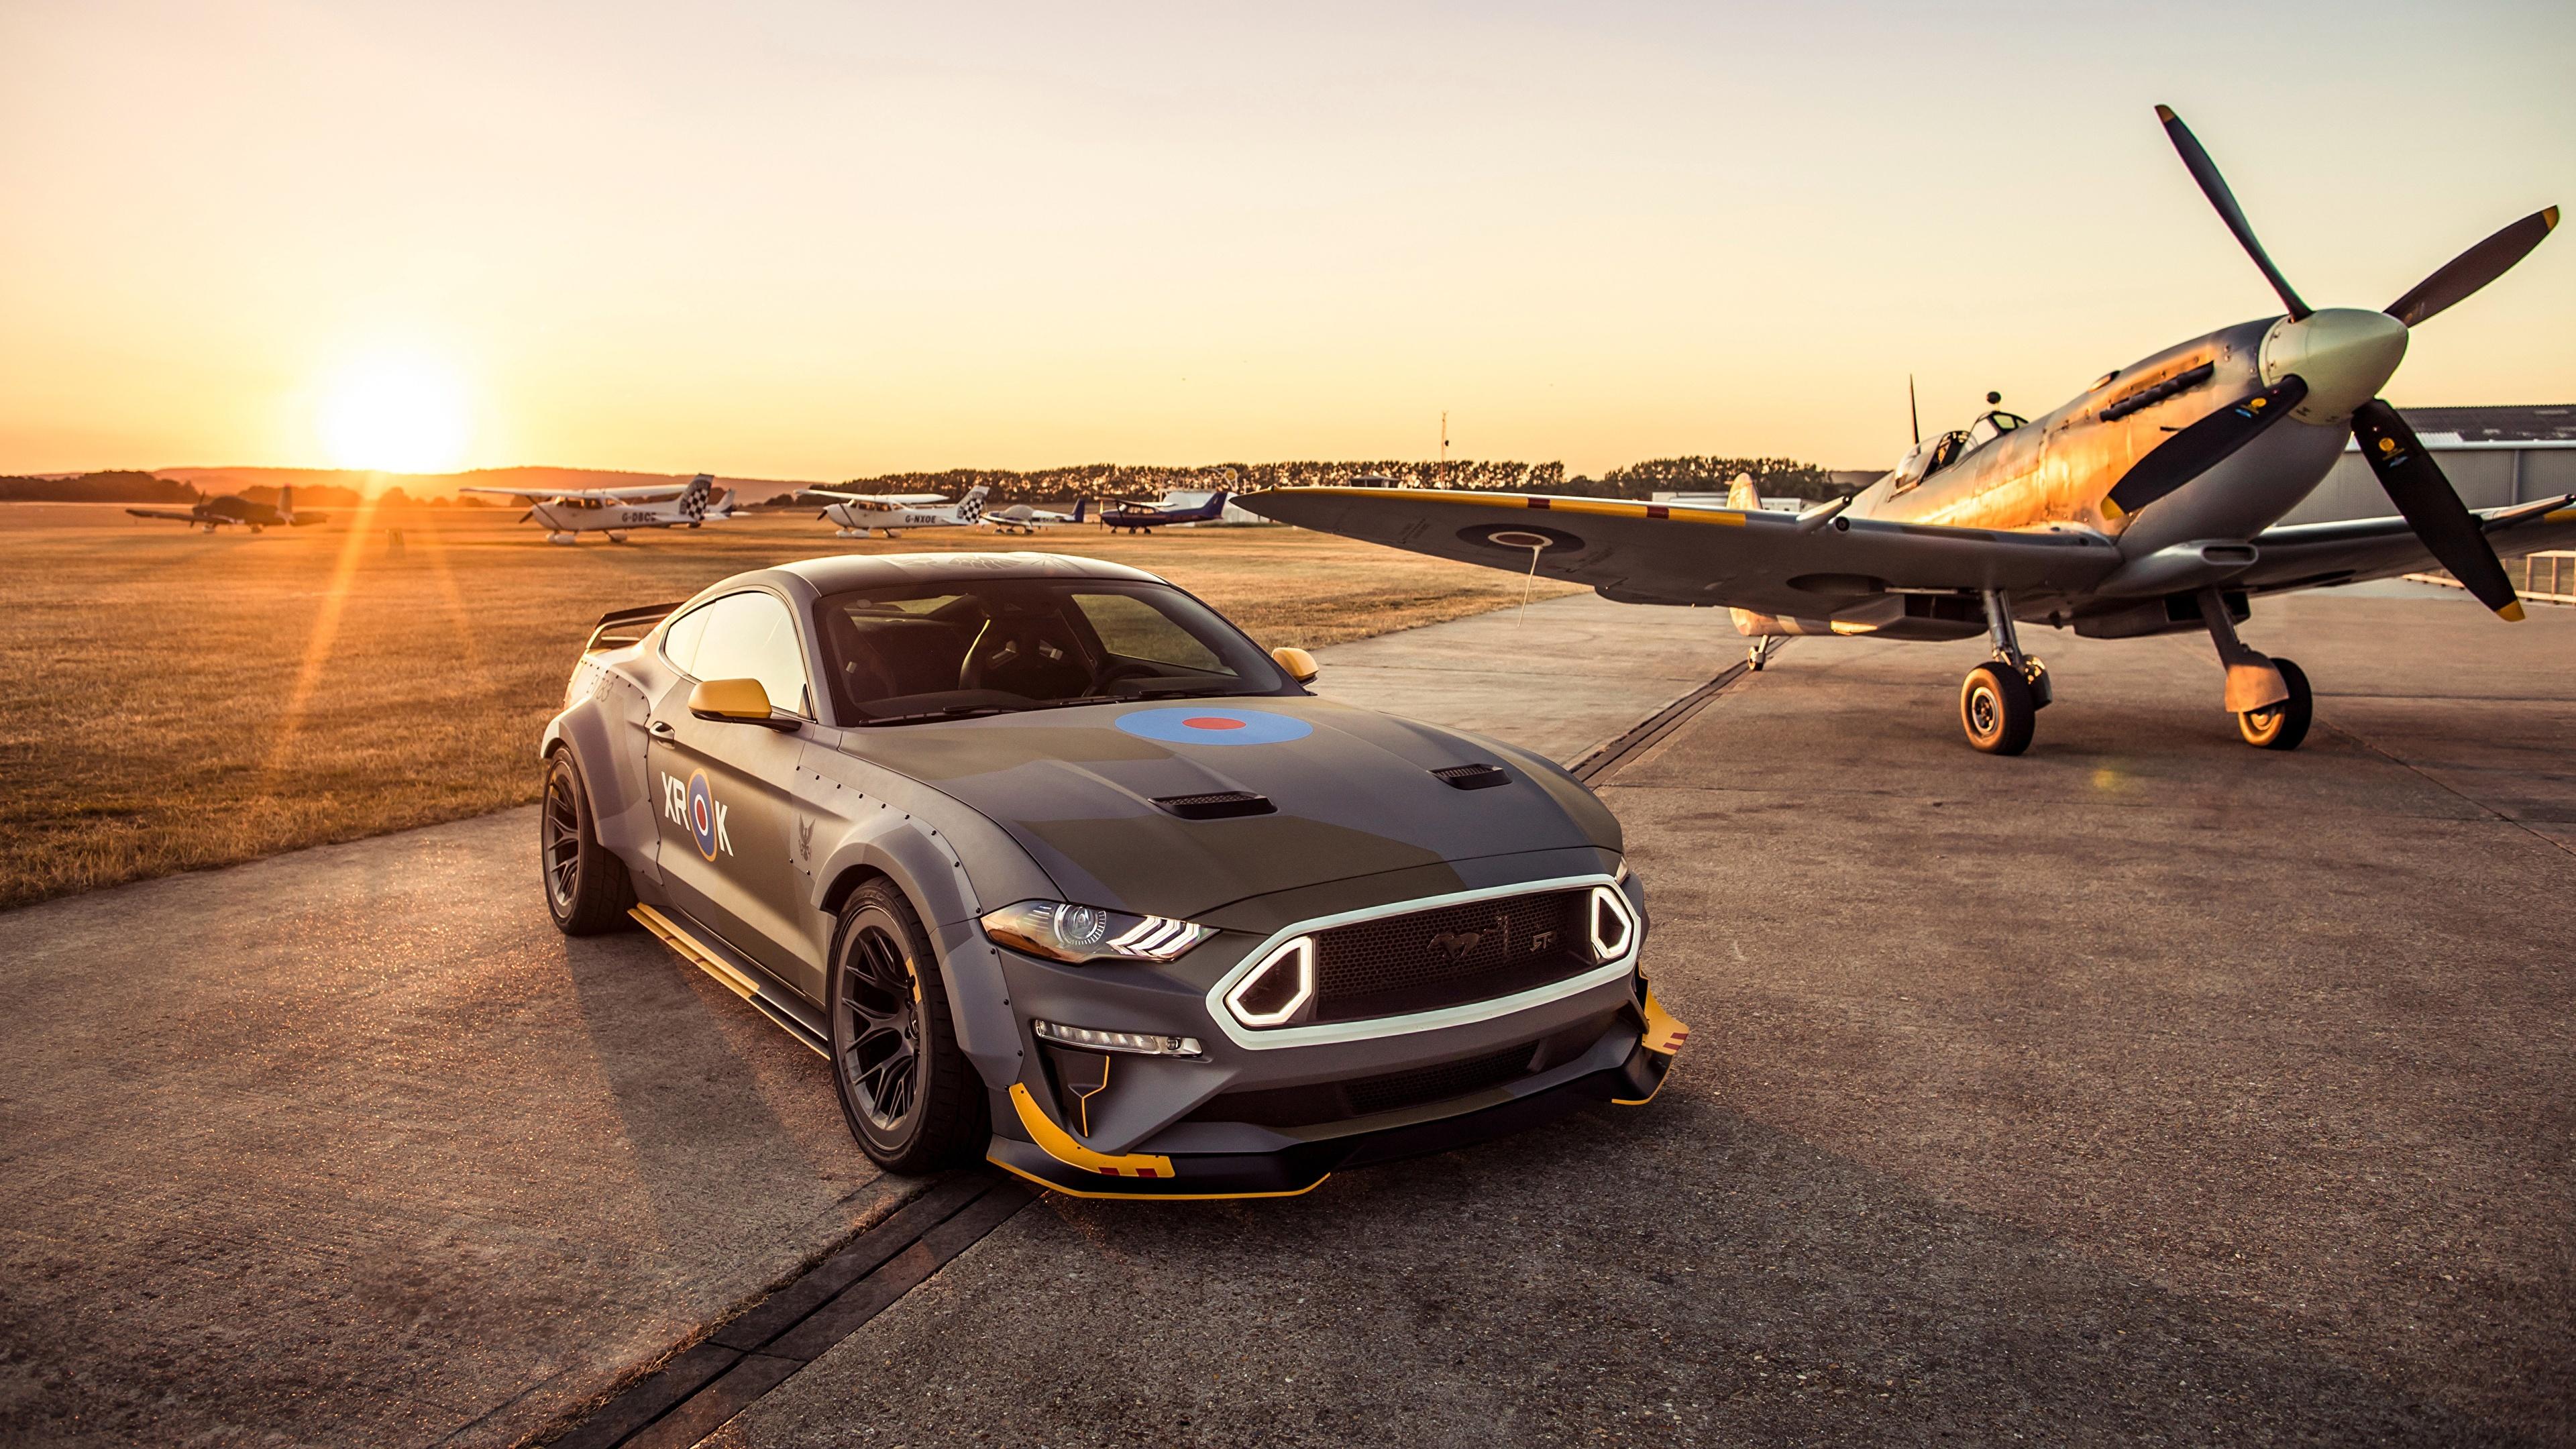 Picture Ford RTR 2018 Mustang GT Eagle Squadron auto 3840x2160